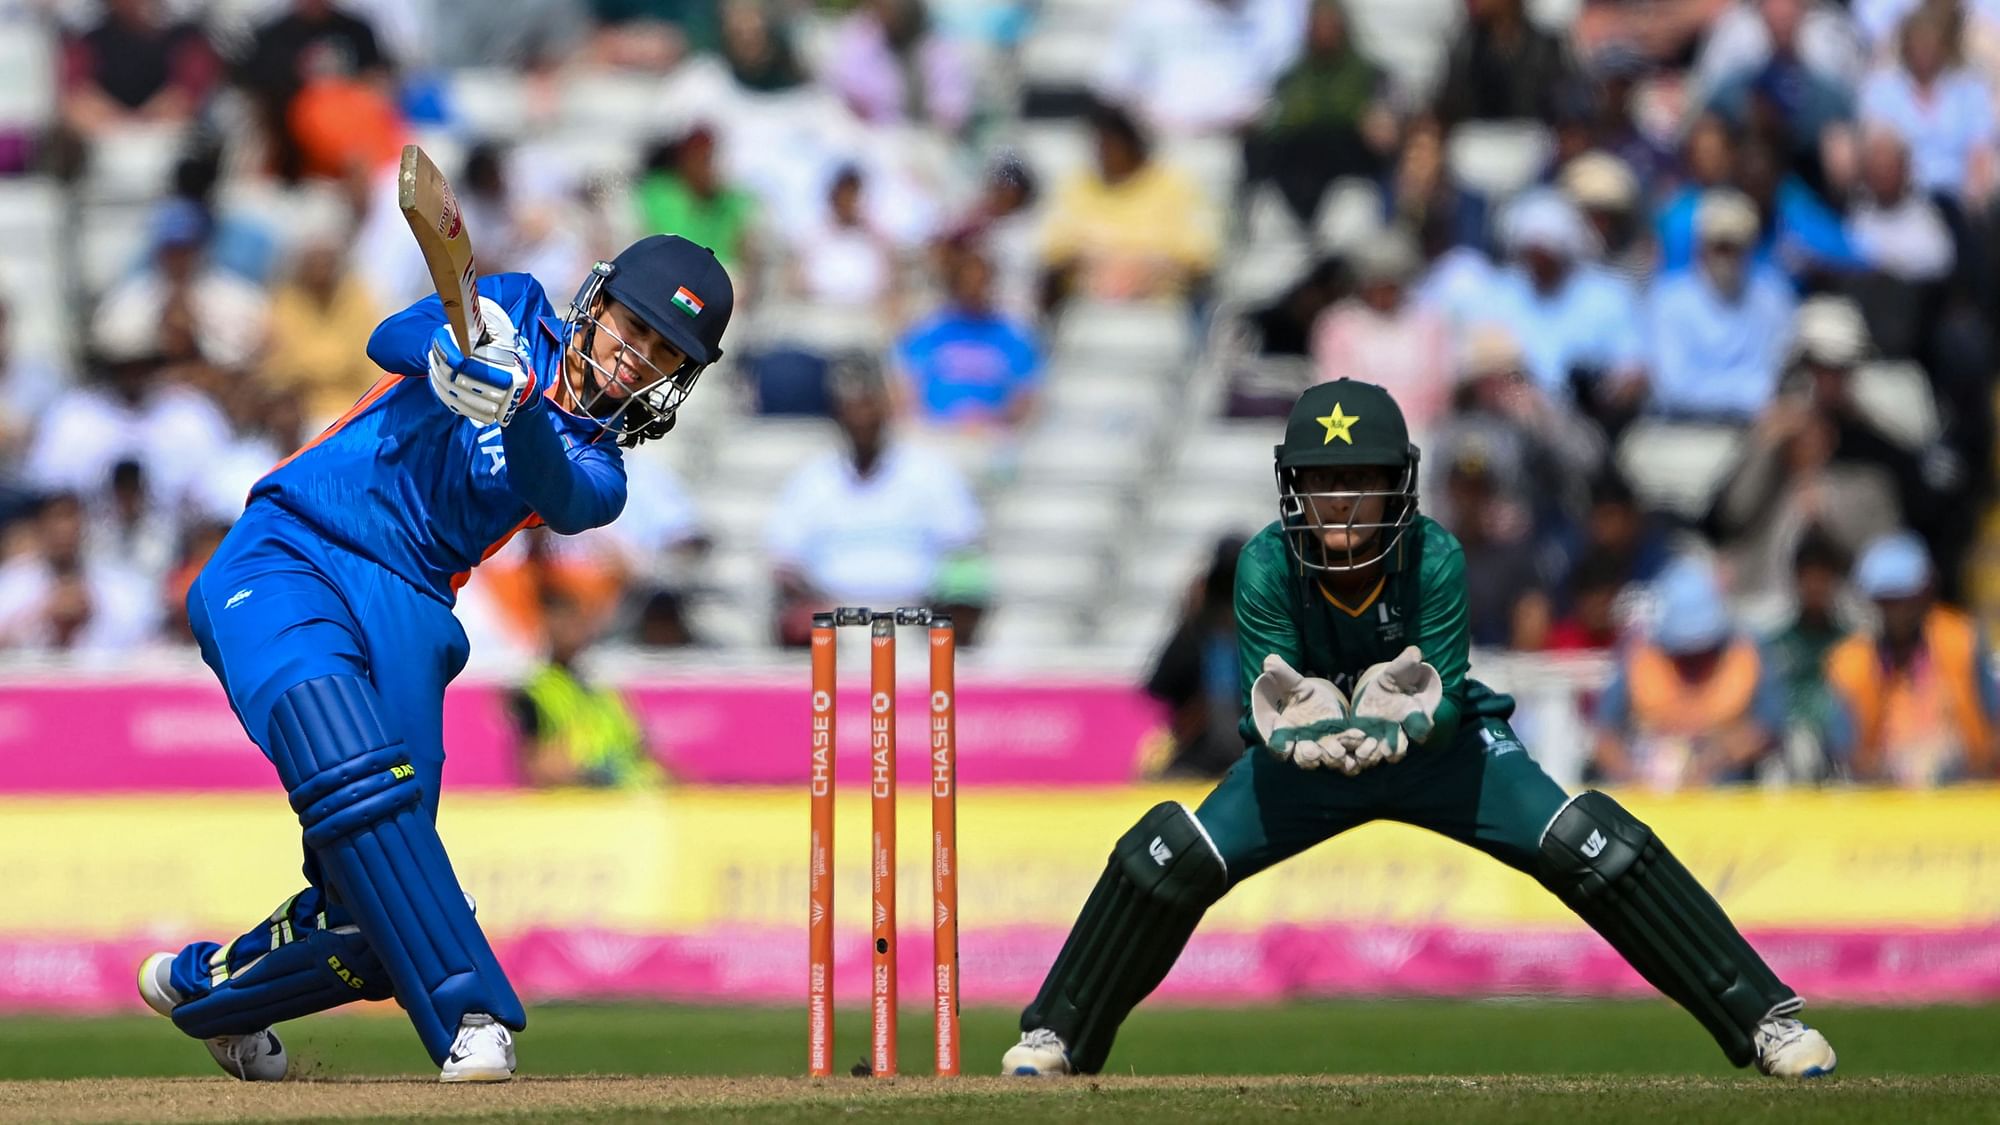 <div class="paragraphs"><p>Indian opener Smriti Mandhana looked in fine touch against Pakistan in the rain-hit women’s Group A match of the 2022 Commonwealth Games at Edgbaston on Sunday</p></div>